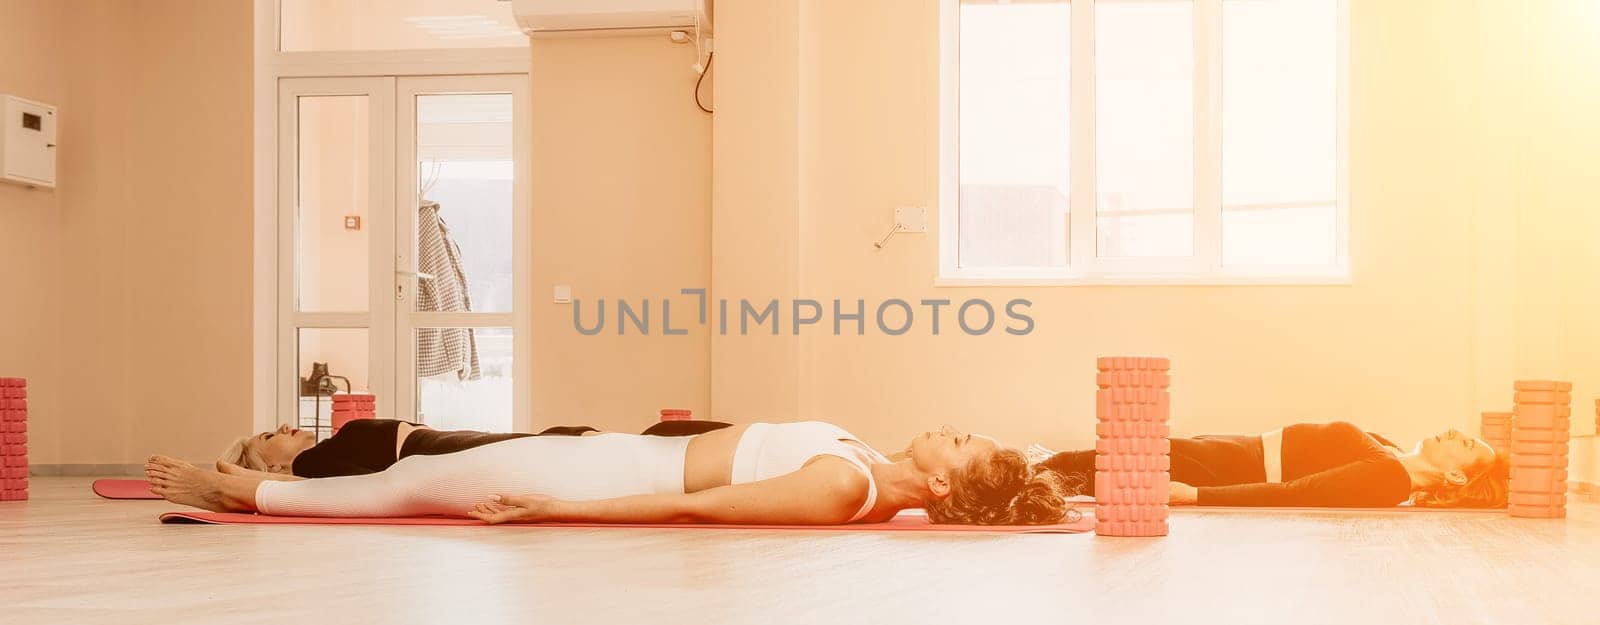 Happy middle aged well looking women, performing fascia exercises on floor using massage foam roller - tool to relieve tension in the back and relieve muscle pain. Female fitness yoga routine concept by panophotograph